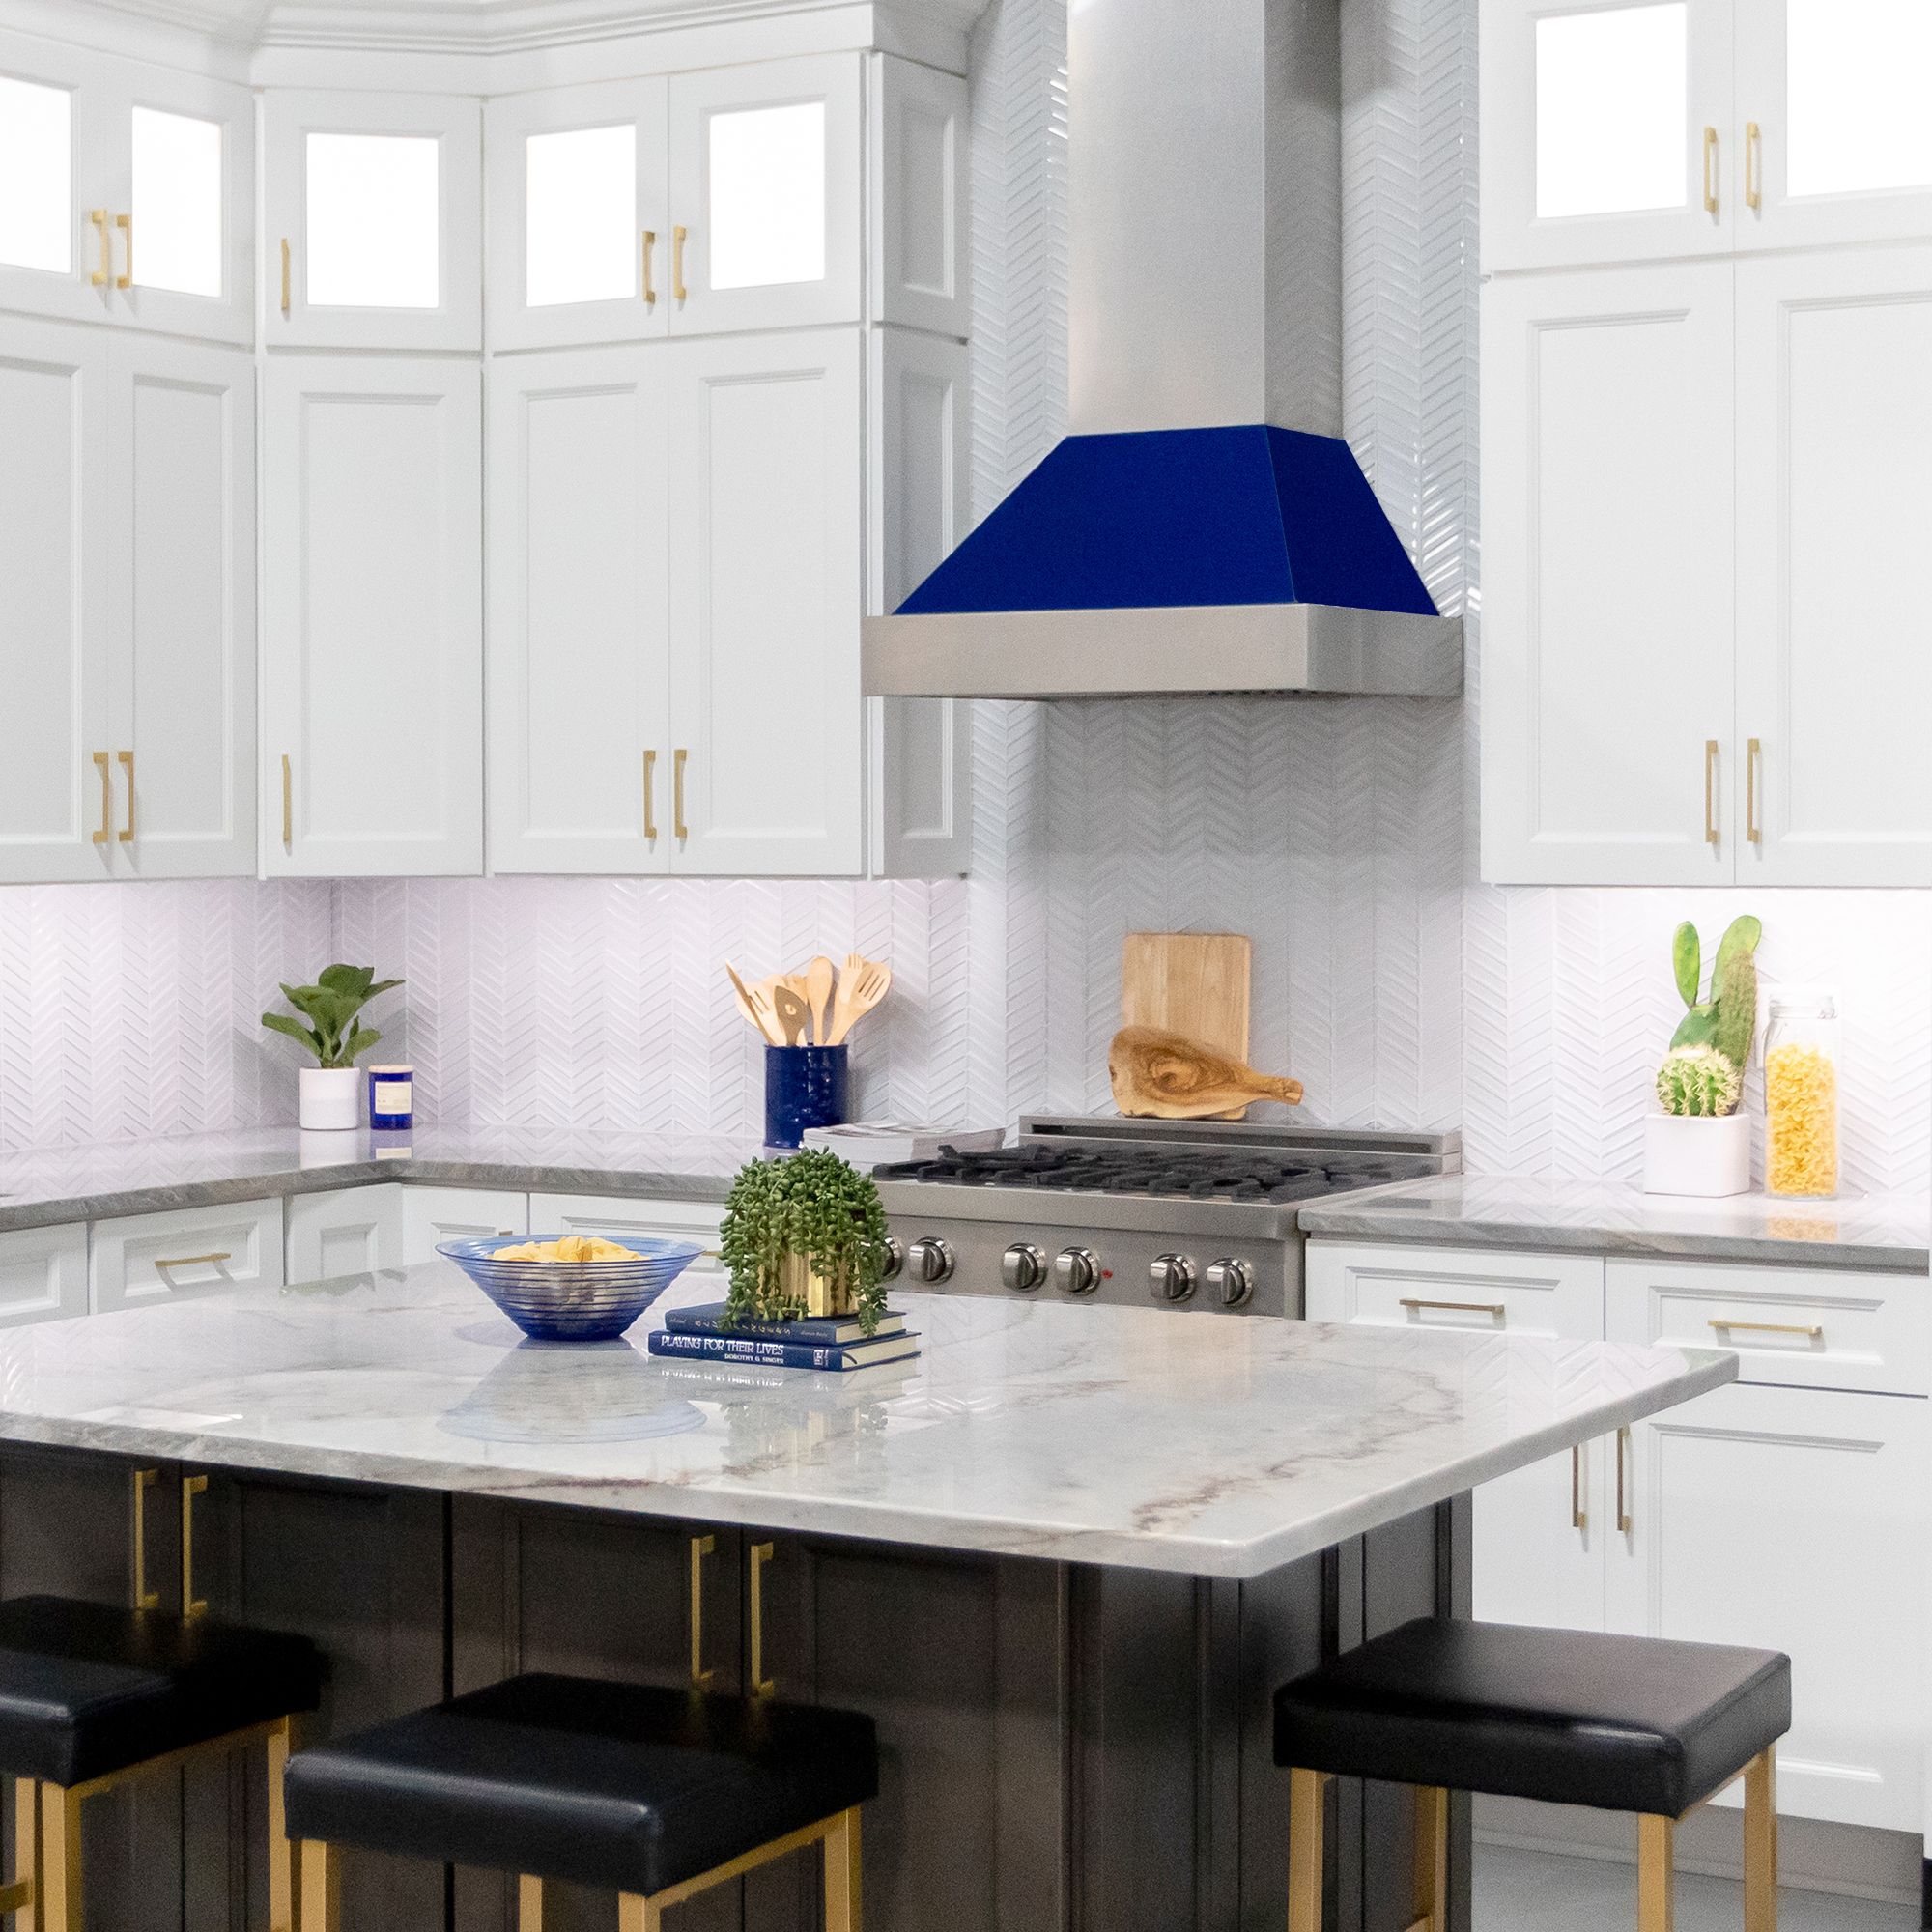 ZLINE Ducted Fingerprint Resistant Stainless Steel Range Hood with Blue Gloss Shell (8654BG) with matching blue gloss range in a white cottage-style kitchen from across island.